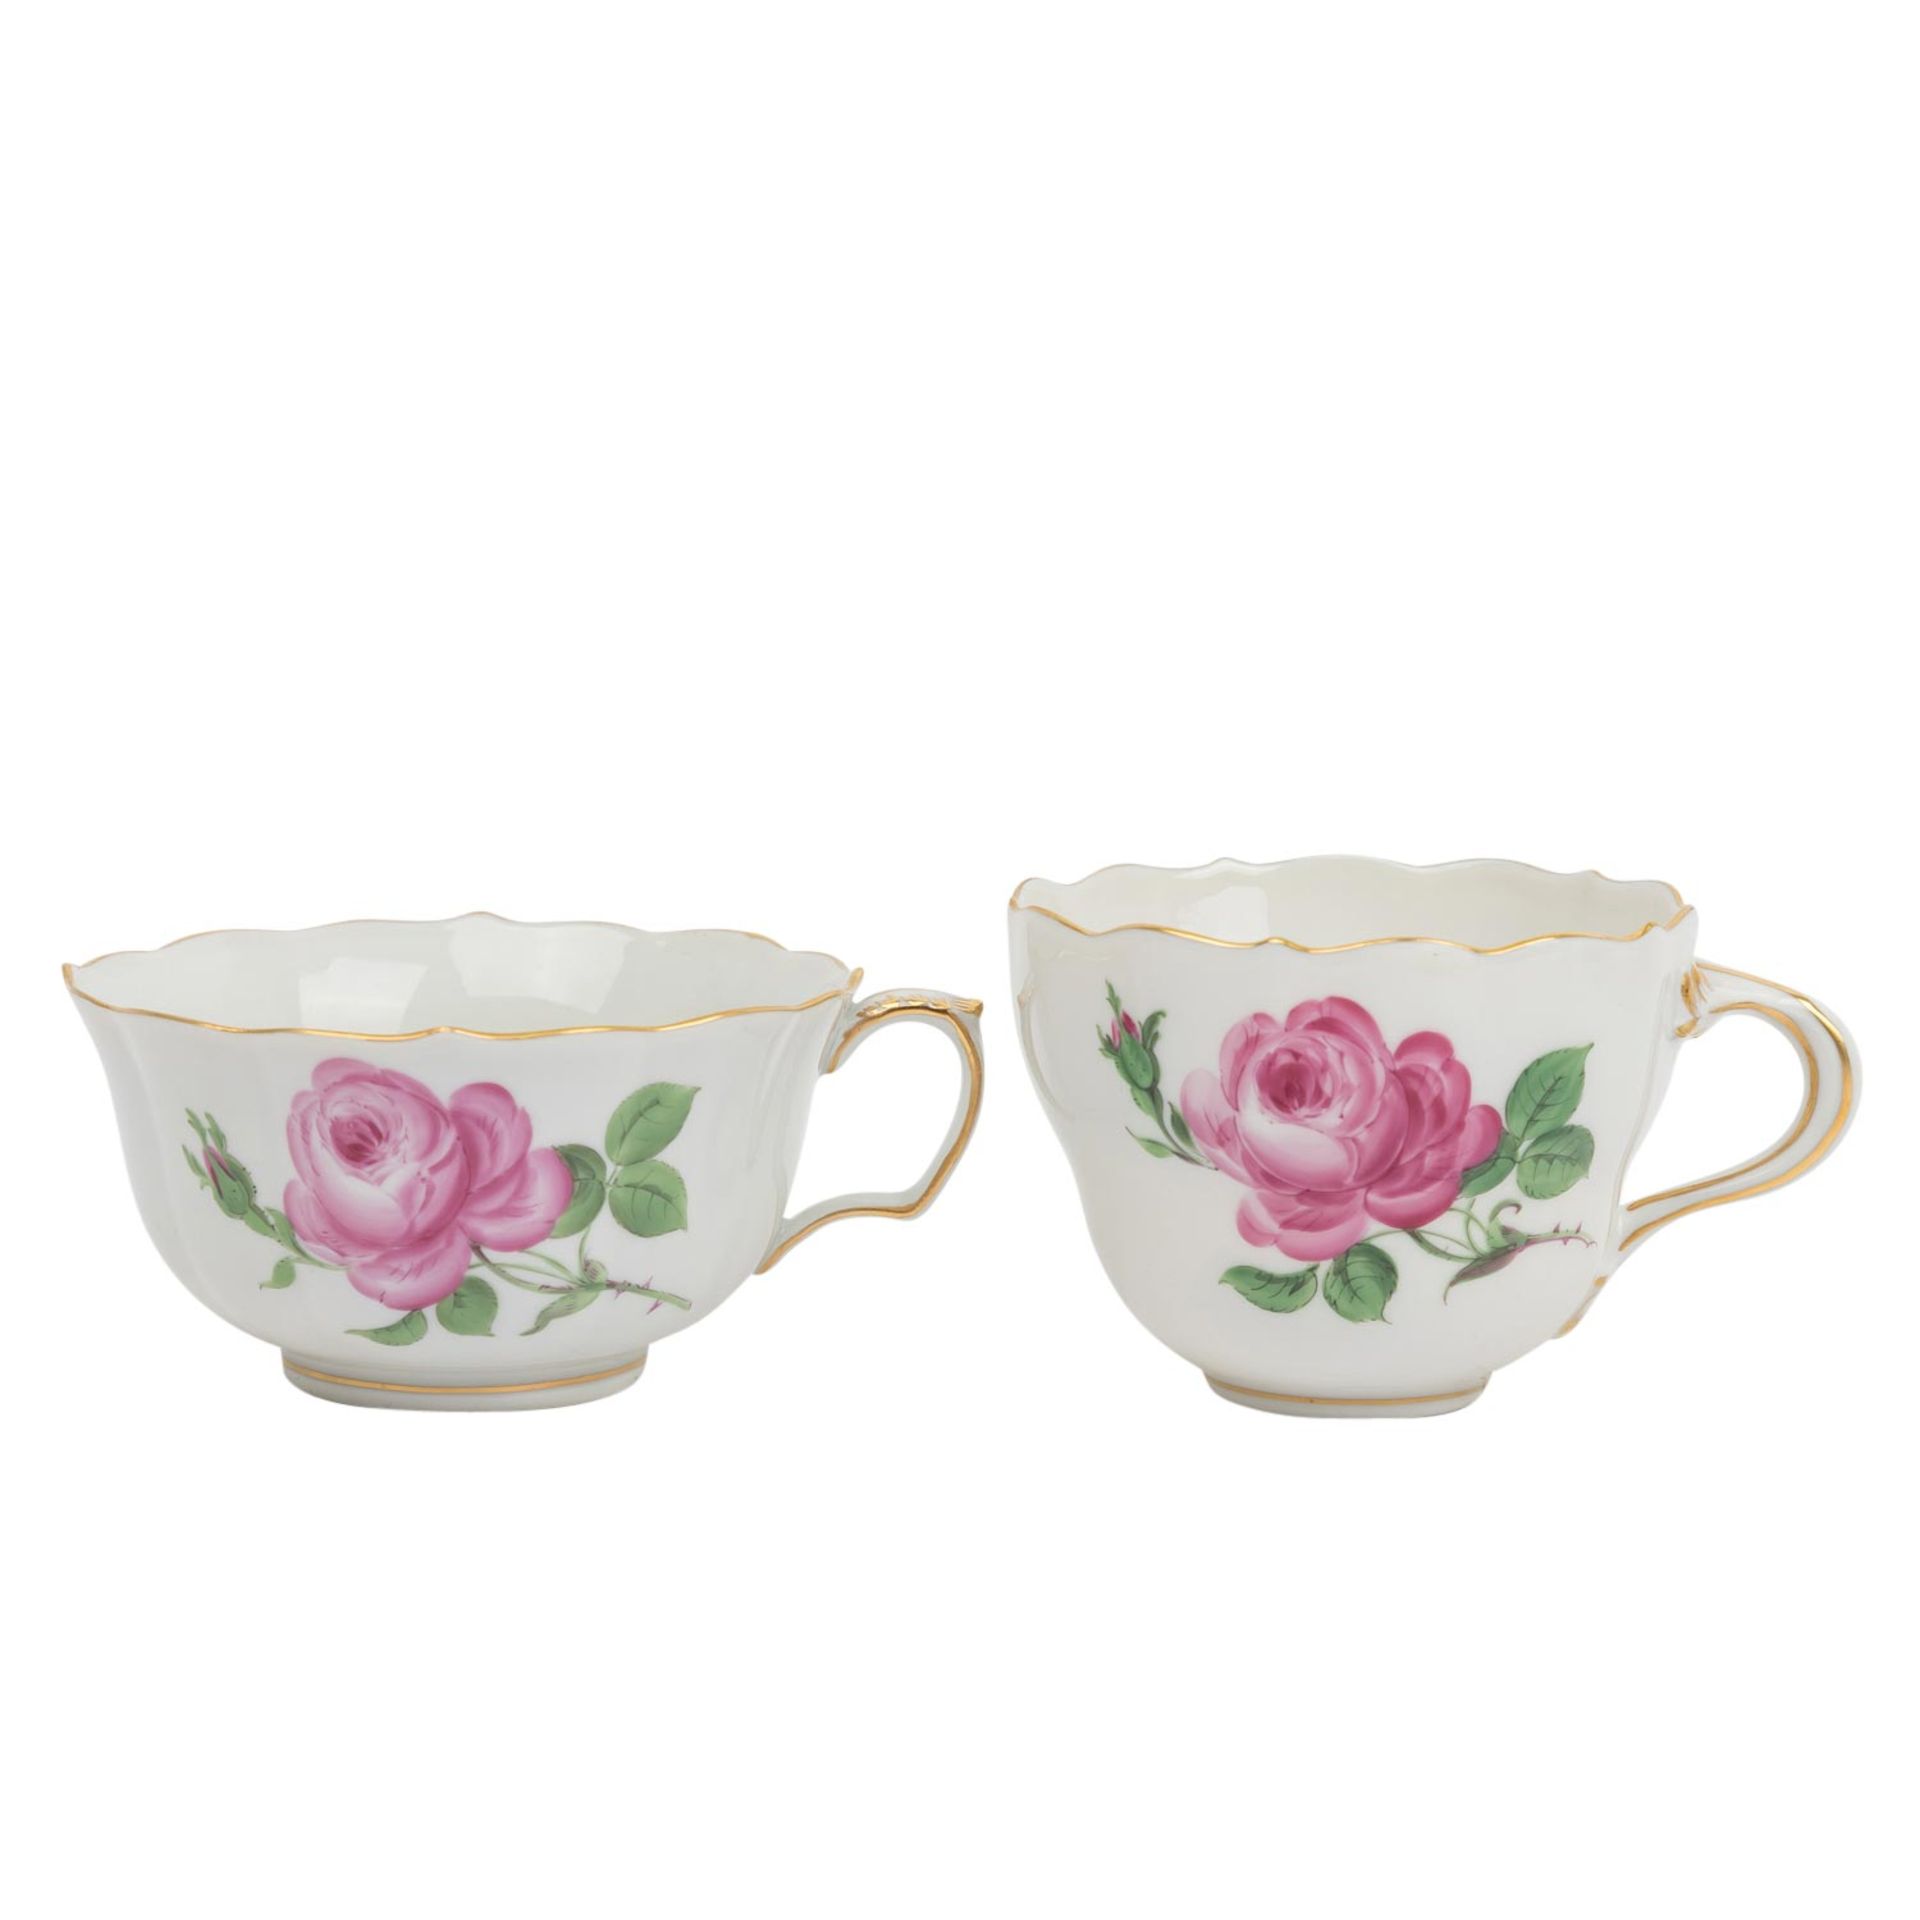 MEISSEN Kaffeeservice f. 8 Personen 'Rote Rose', 2. Wahl, 20. Jh. - Image 4 of 8